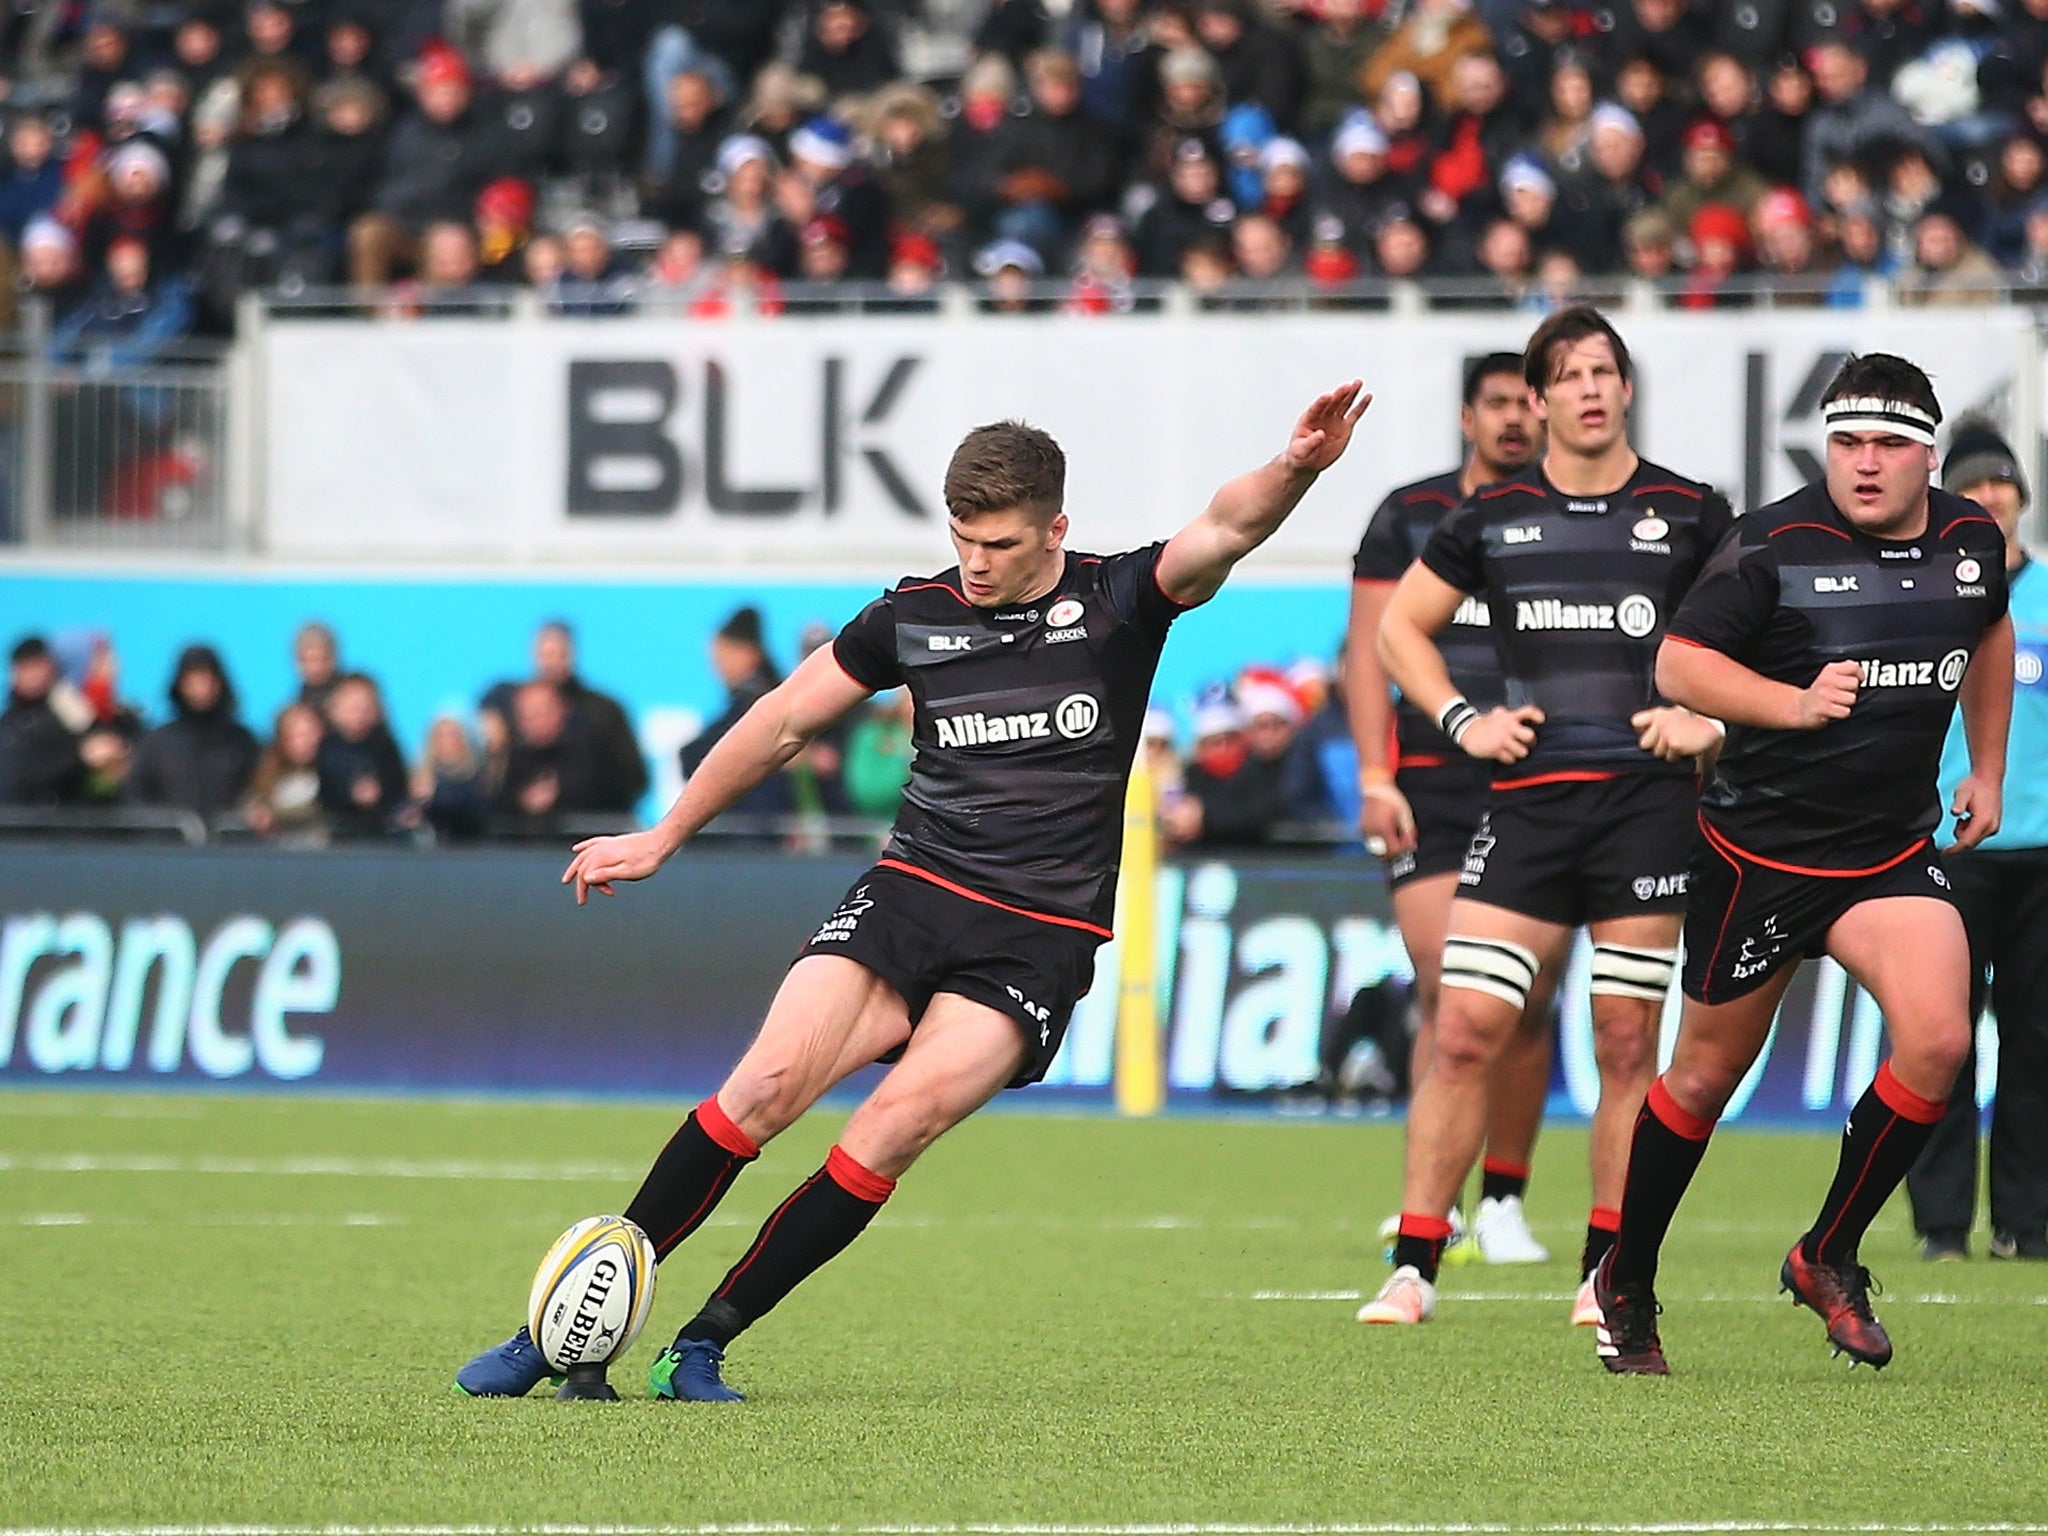 Farrell's kicking helped extend Saracens' lead